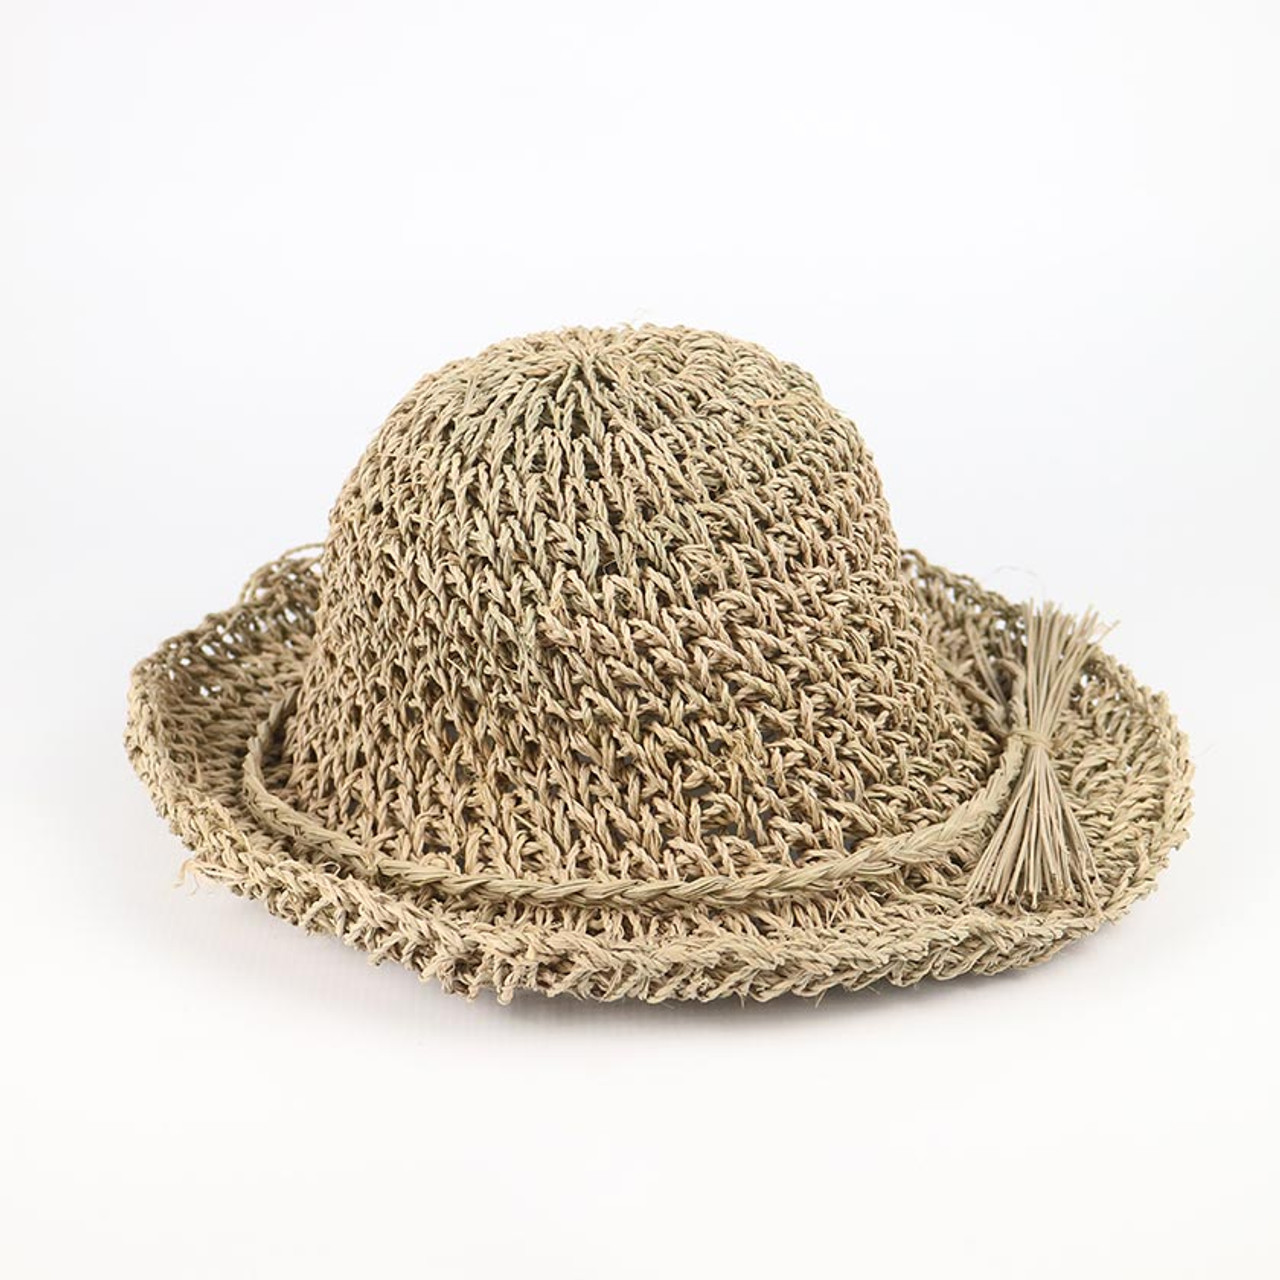 https://cdn11.bigcommerce.com/s-1a7tcor/images/stencil/1280x1280/products/8451/46531/azulwear-grass-hat__22740.1692010157.jpg?c=2